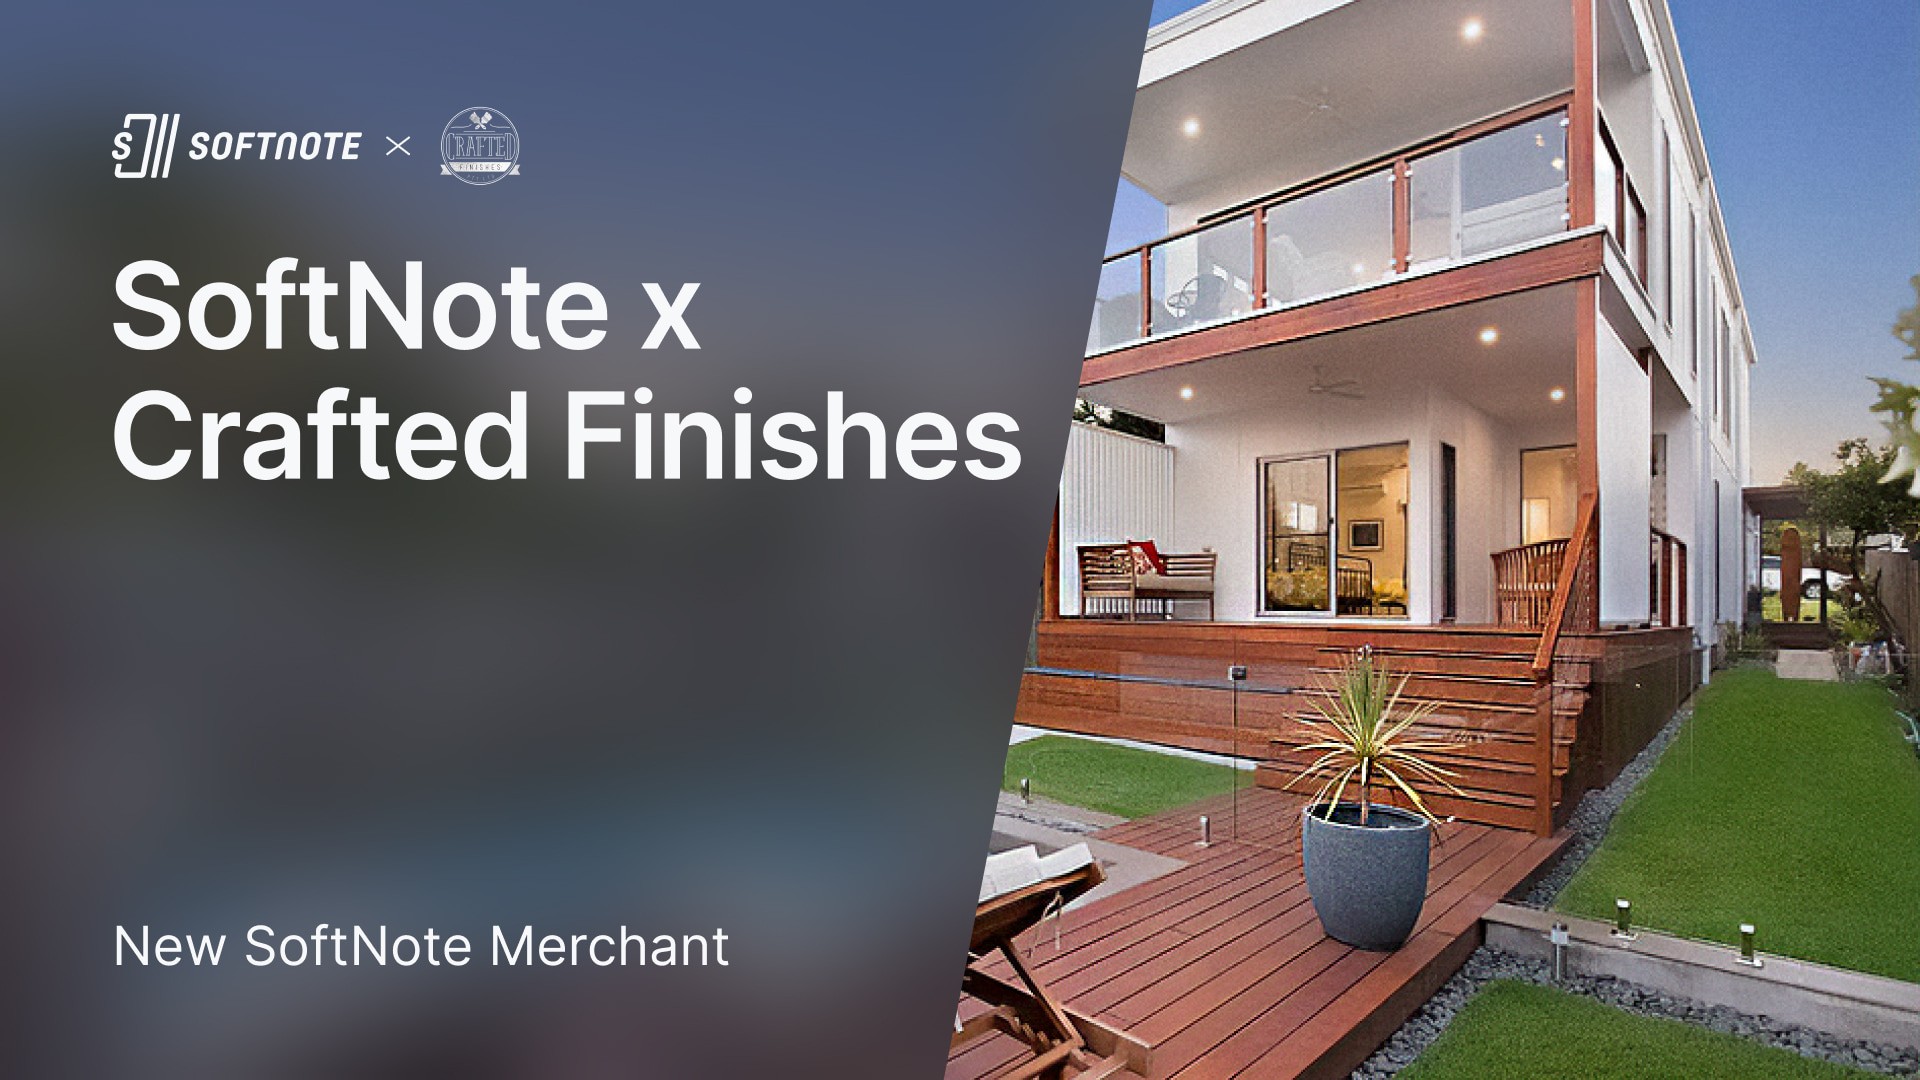 Tectum Announces Crafted Finishes as a SoftNote Merchant